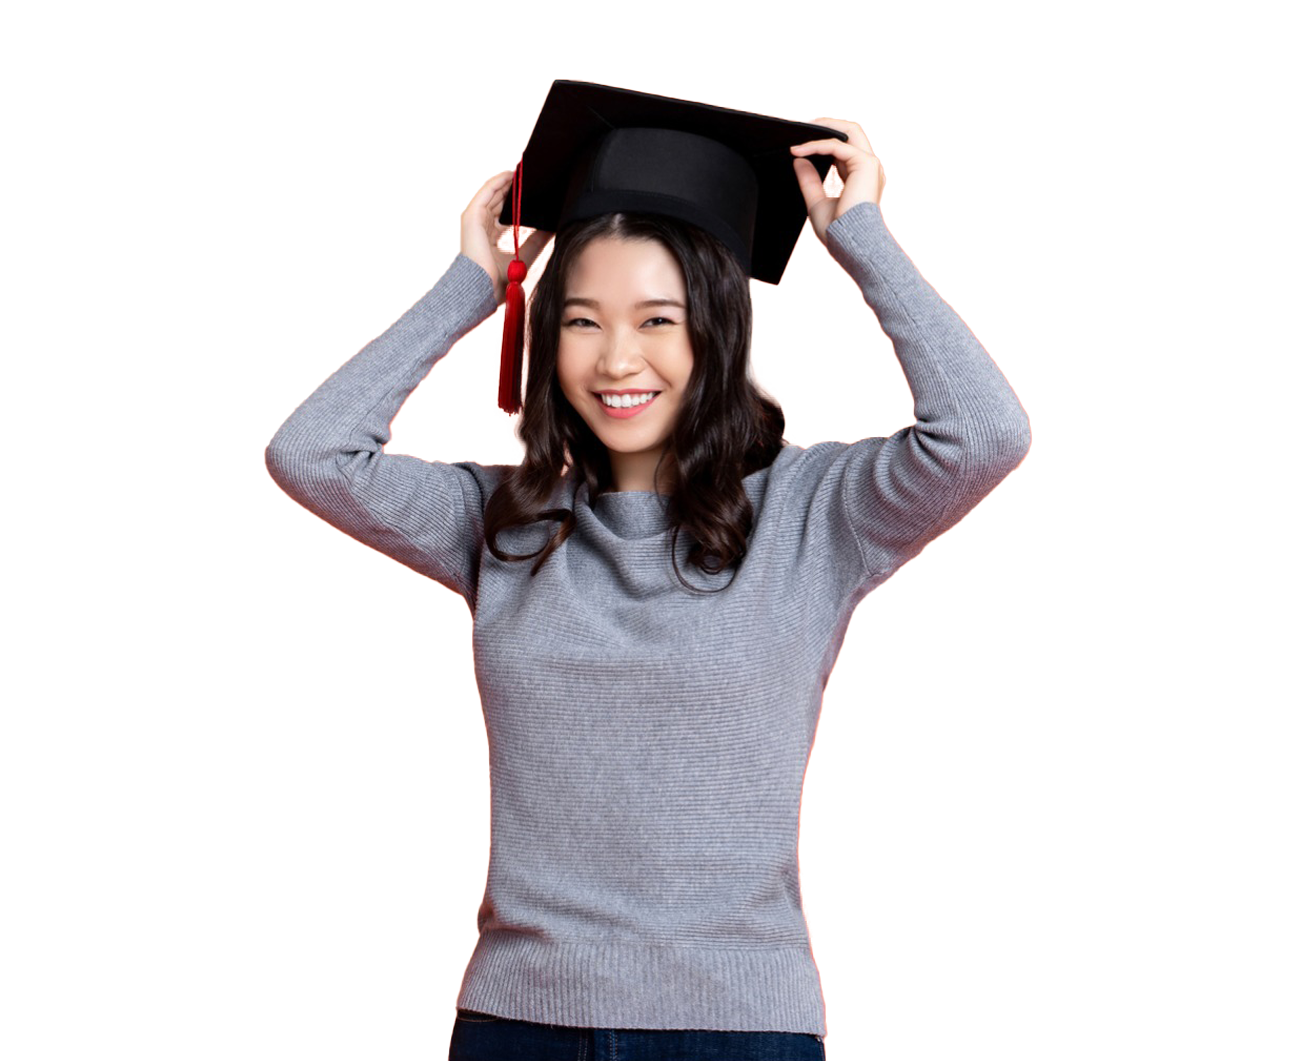 Woman smiling while wearing a graduation cap